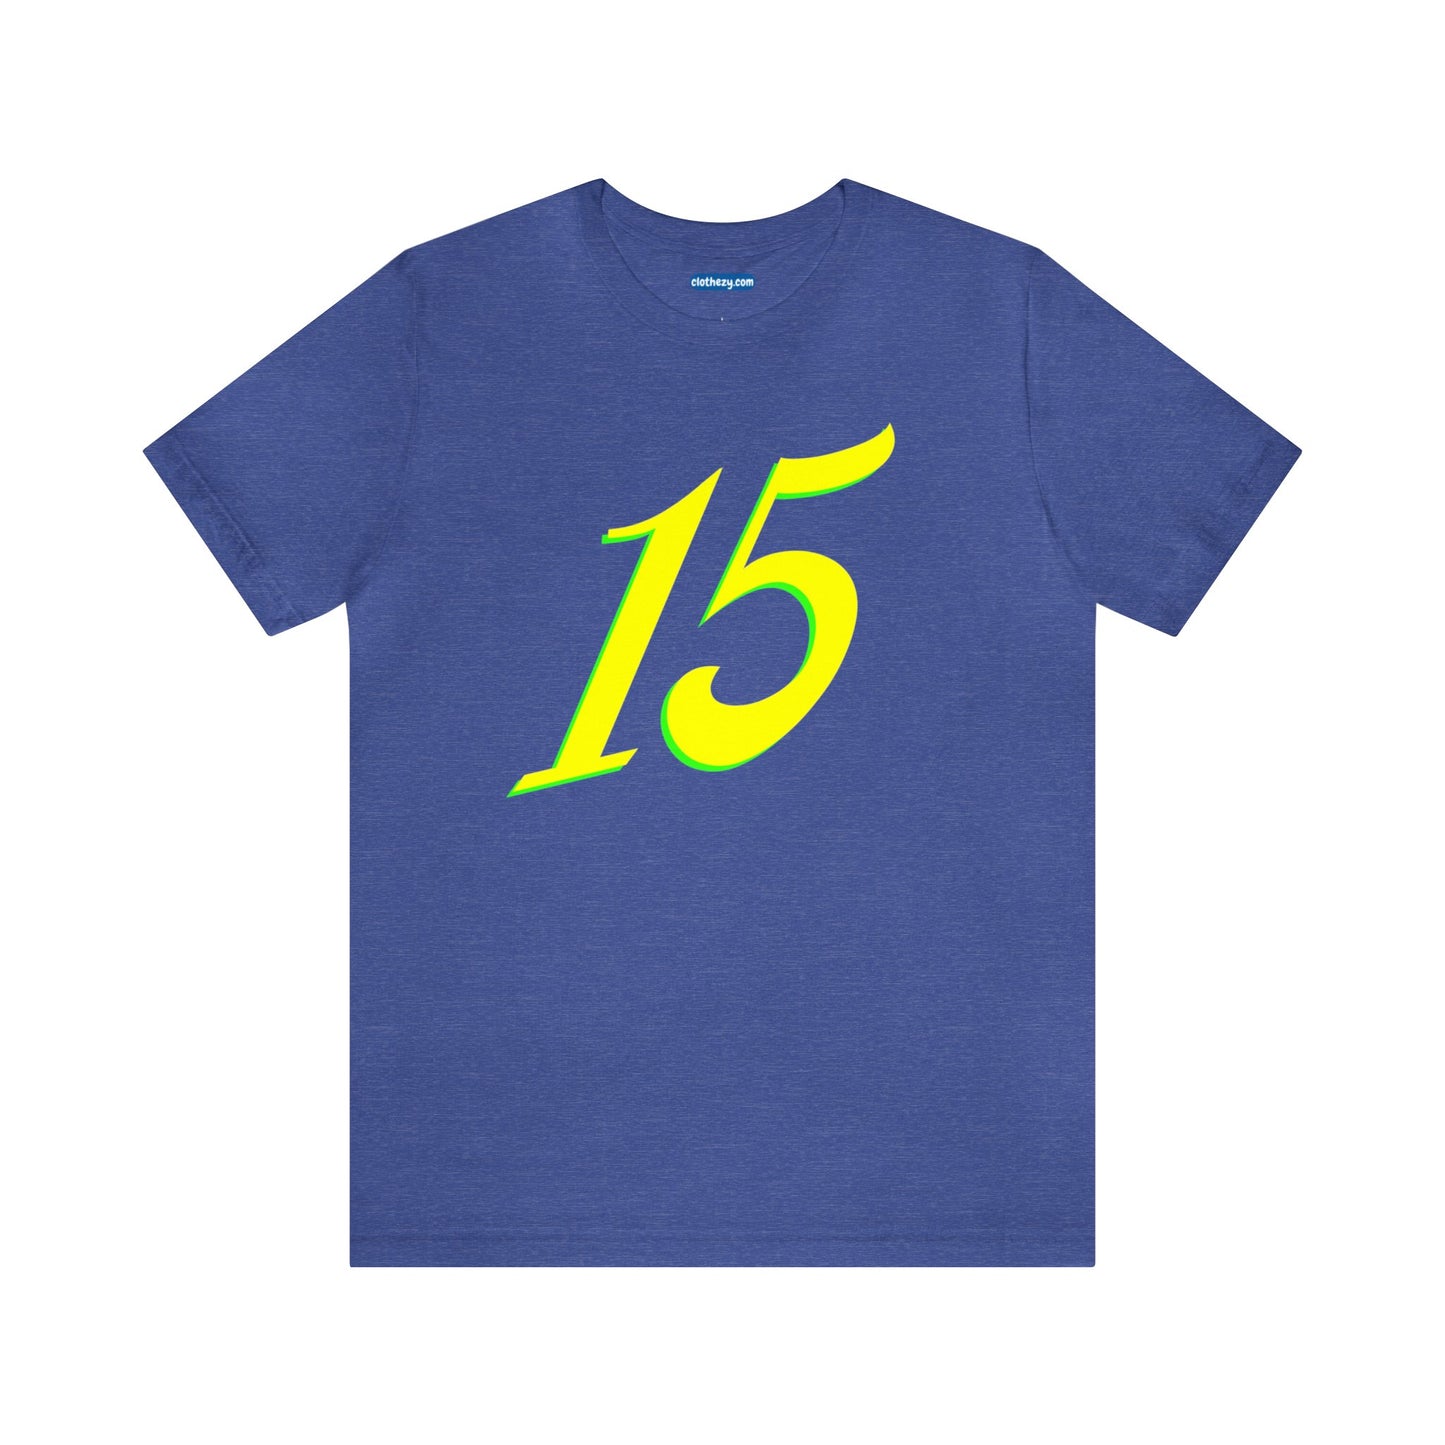 Number 15 Design - Soft Cotton Tee for birthdays and celebrations, Gift for friends and family, Multiple Options by clothezy.com in Navy Size Small - Buy Now